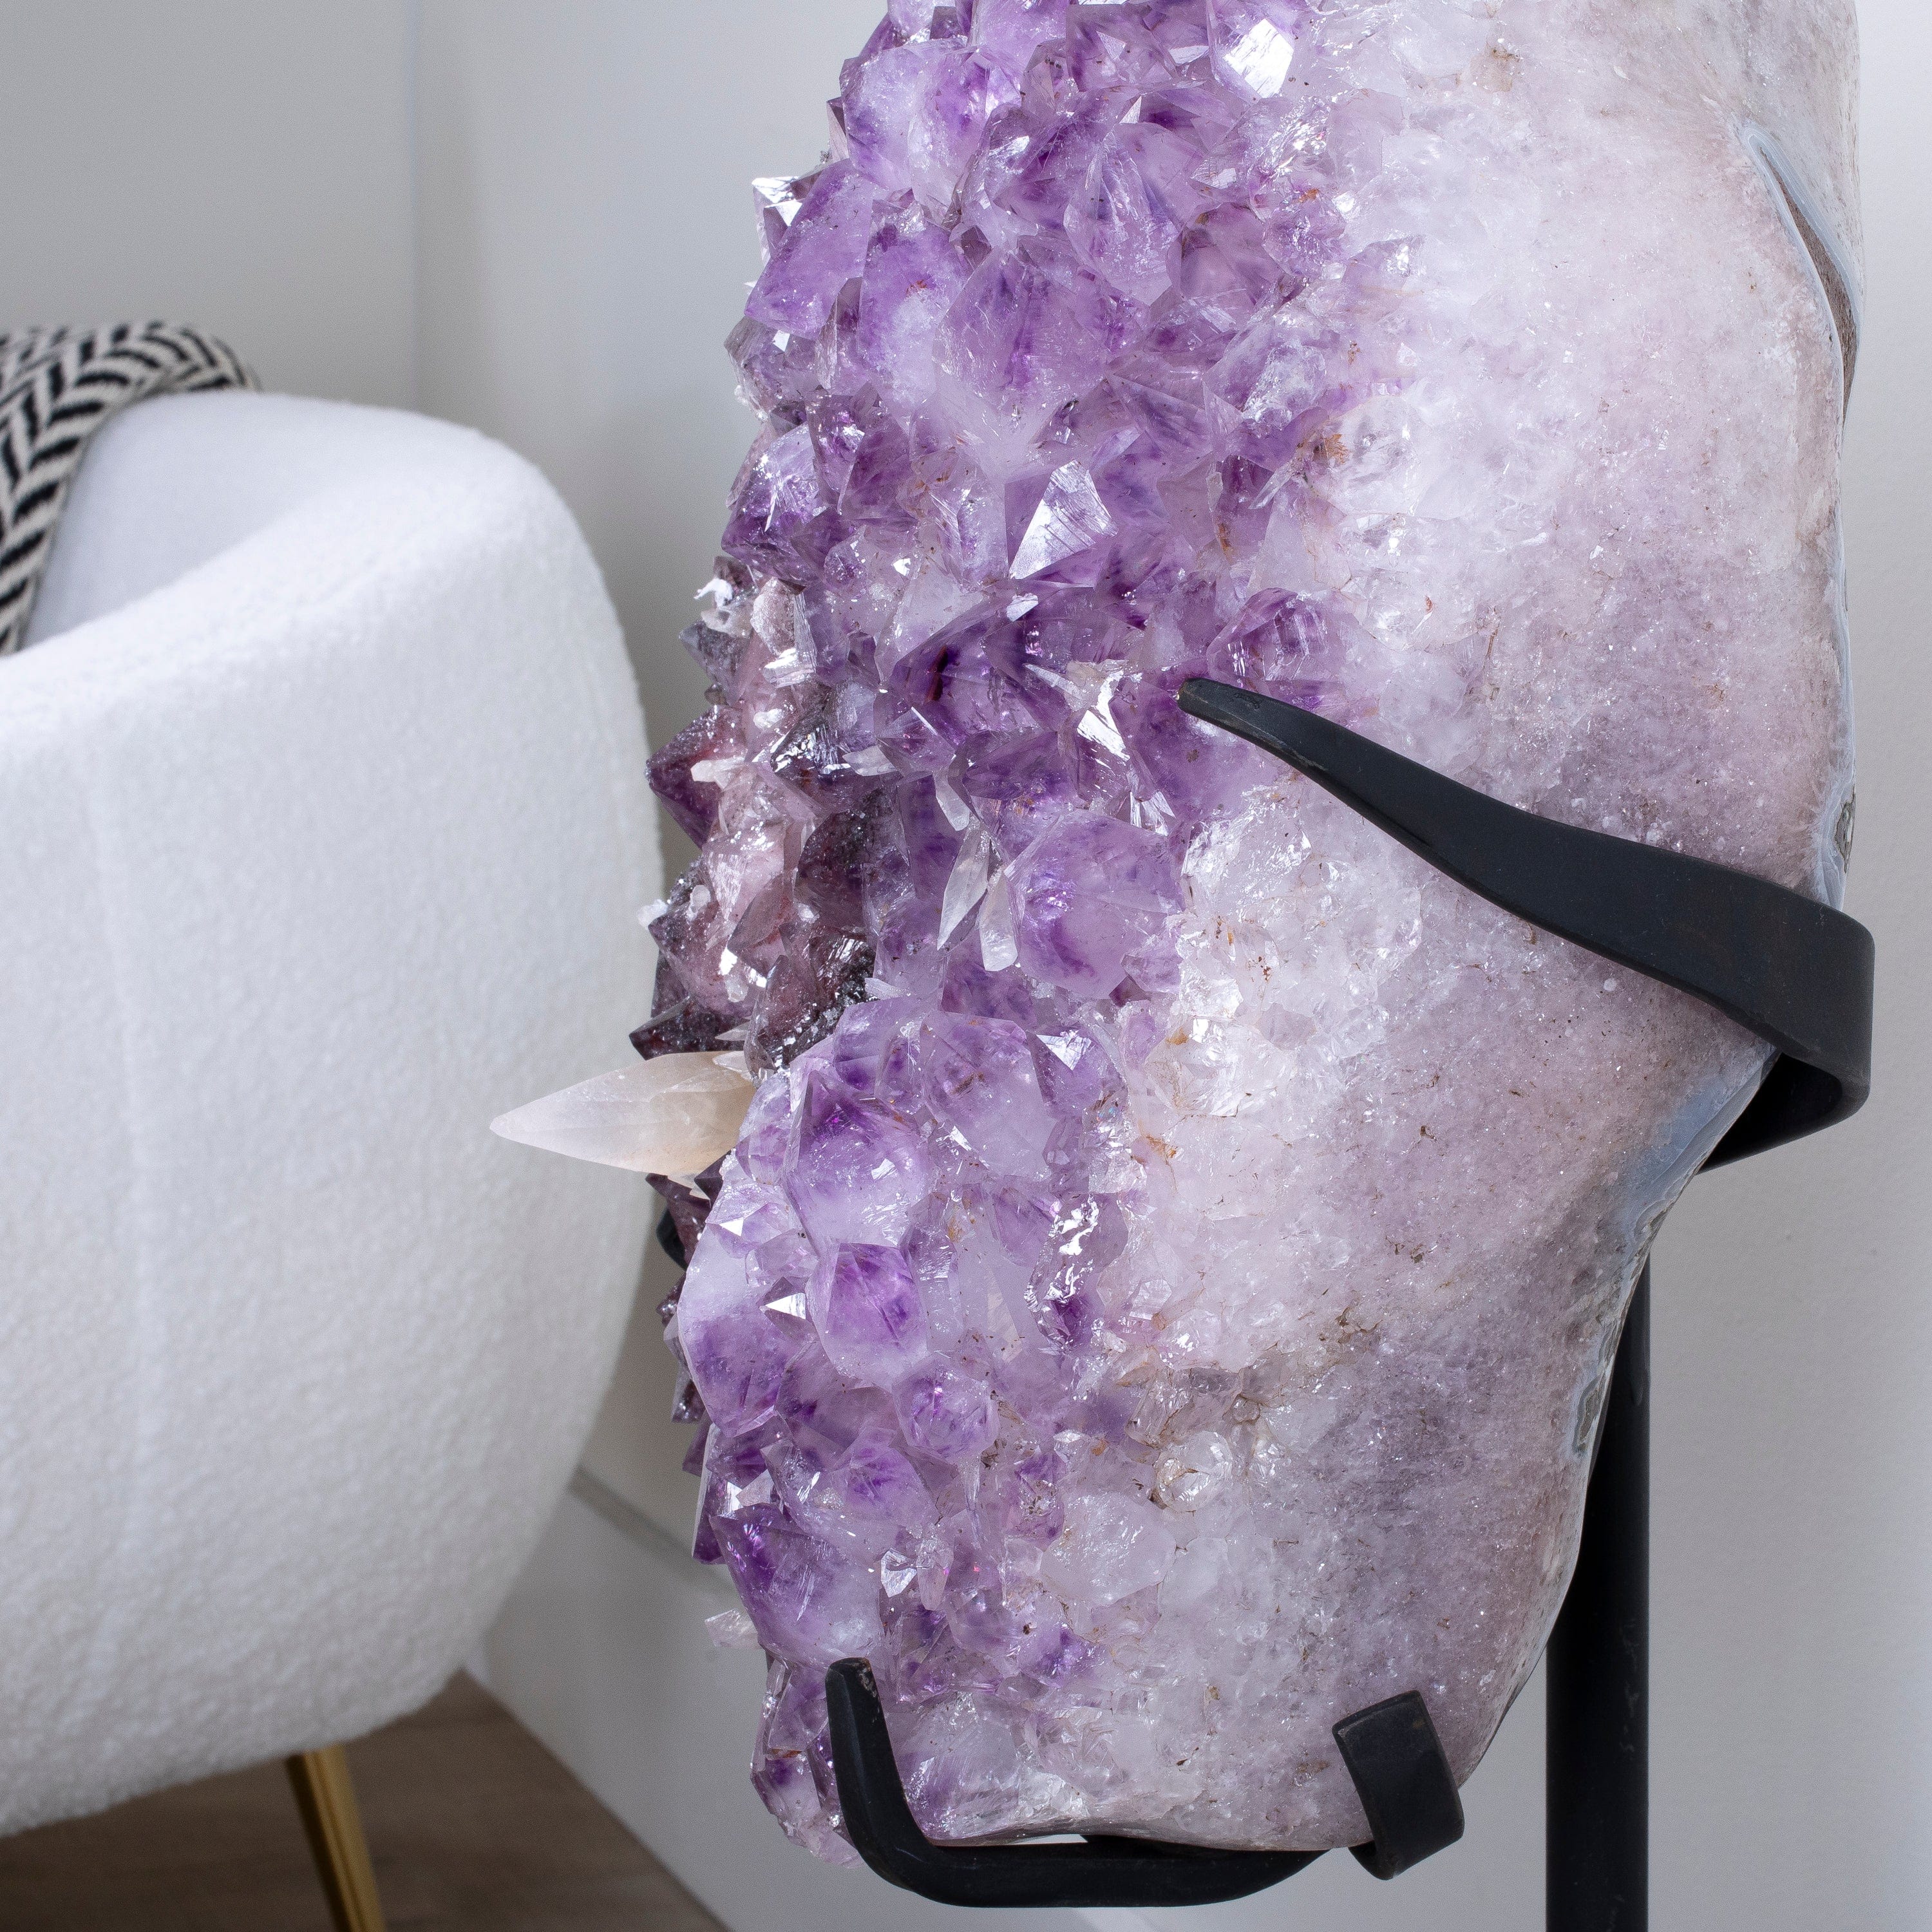 Kalifano Amethyst Amethyst Geode with Calcite from Brazil on Custom Stand- 31" / 66 lbs BAG6400.004